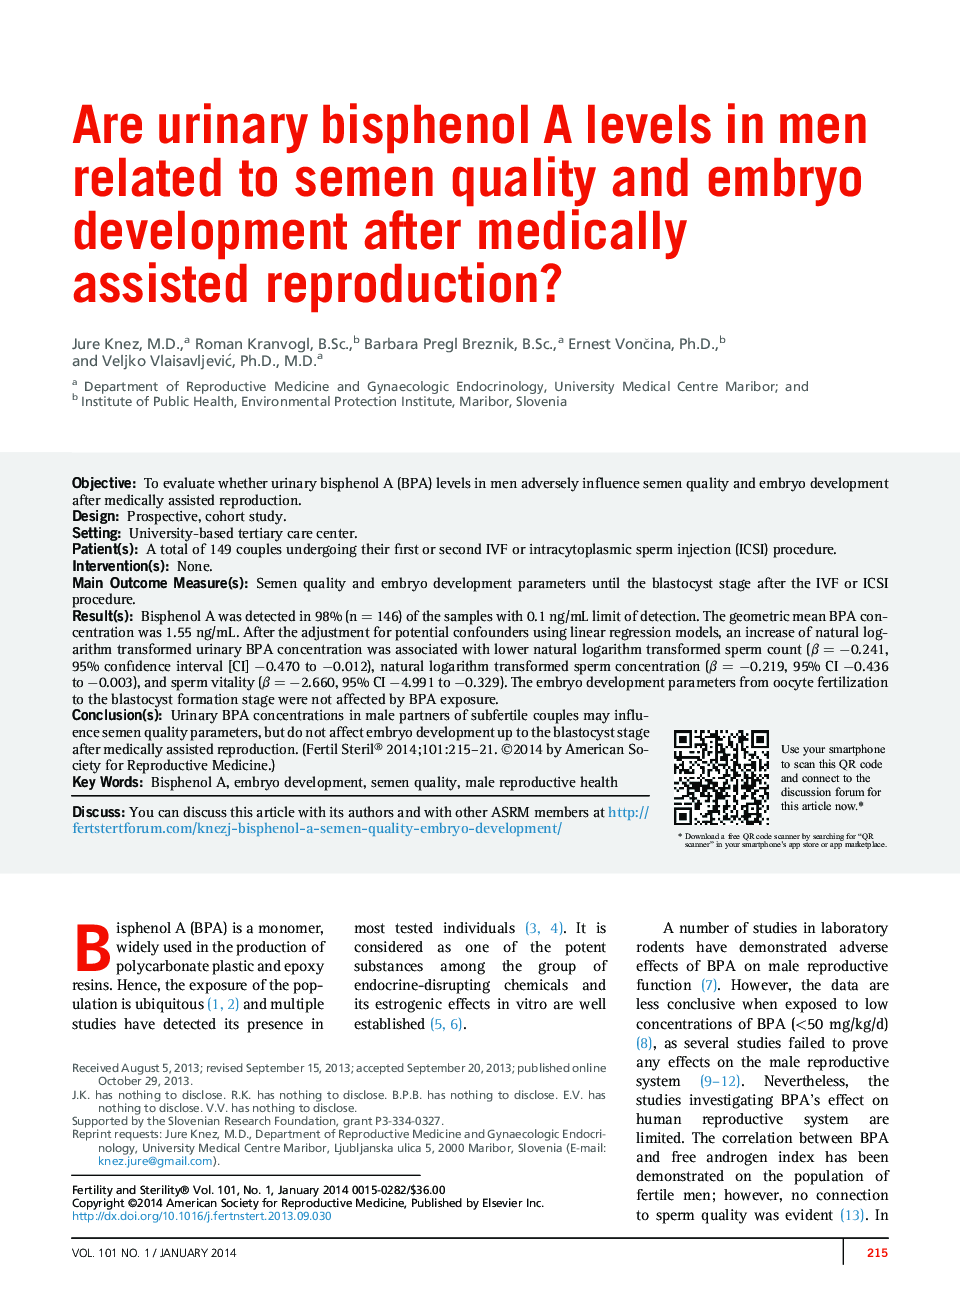 Are urinary bisphenol A levels in men related to semen quality and embryo development after medically assisted reproduction?